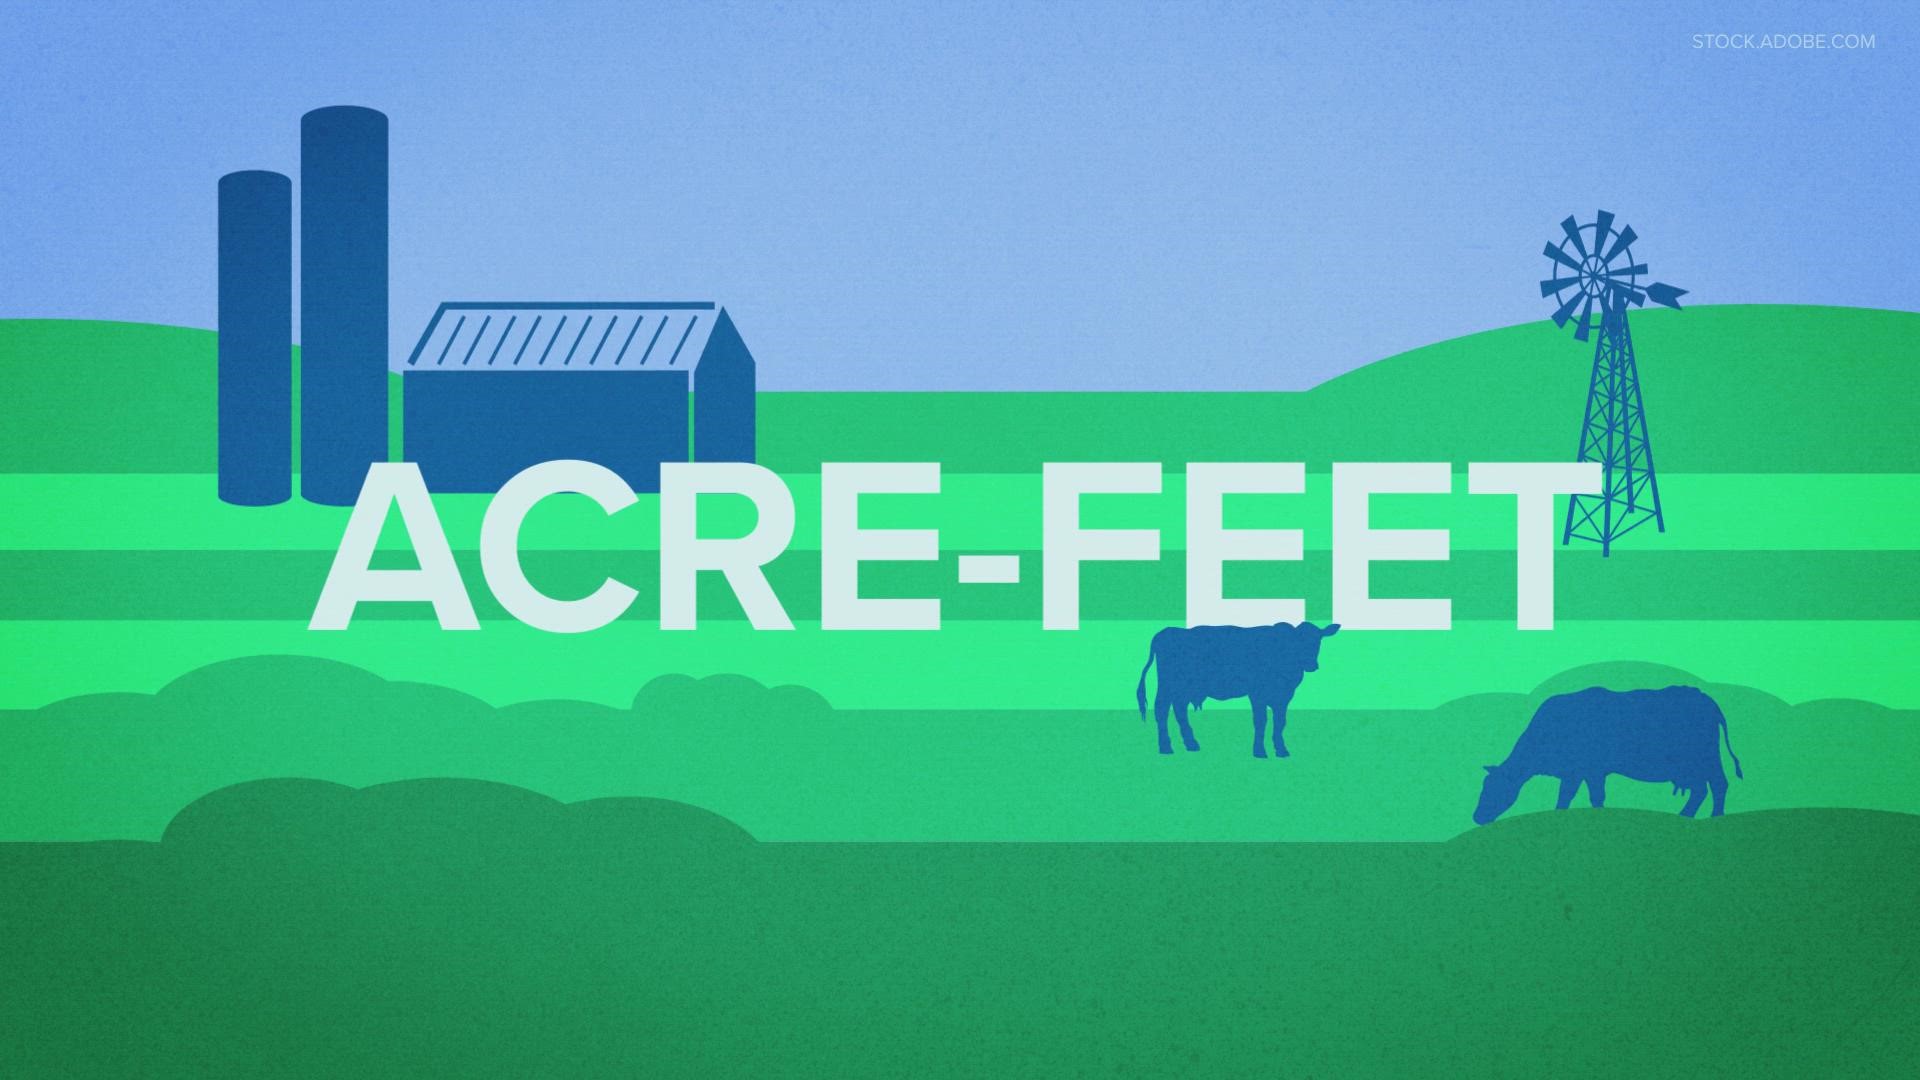 An acre-foot is a unit of volume used in reference to large-scale water resources.